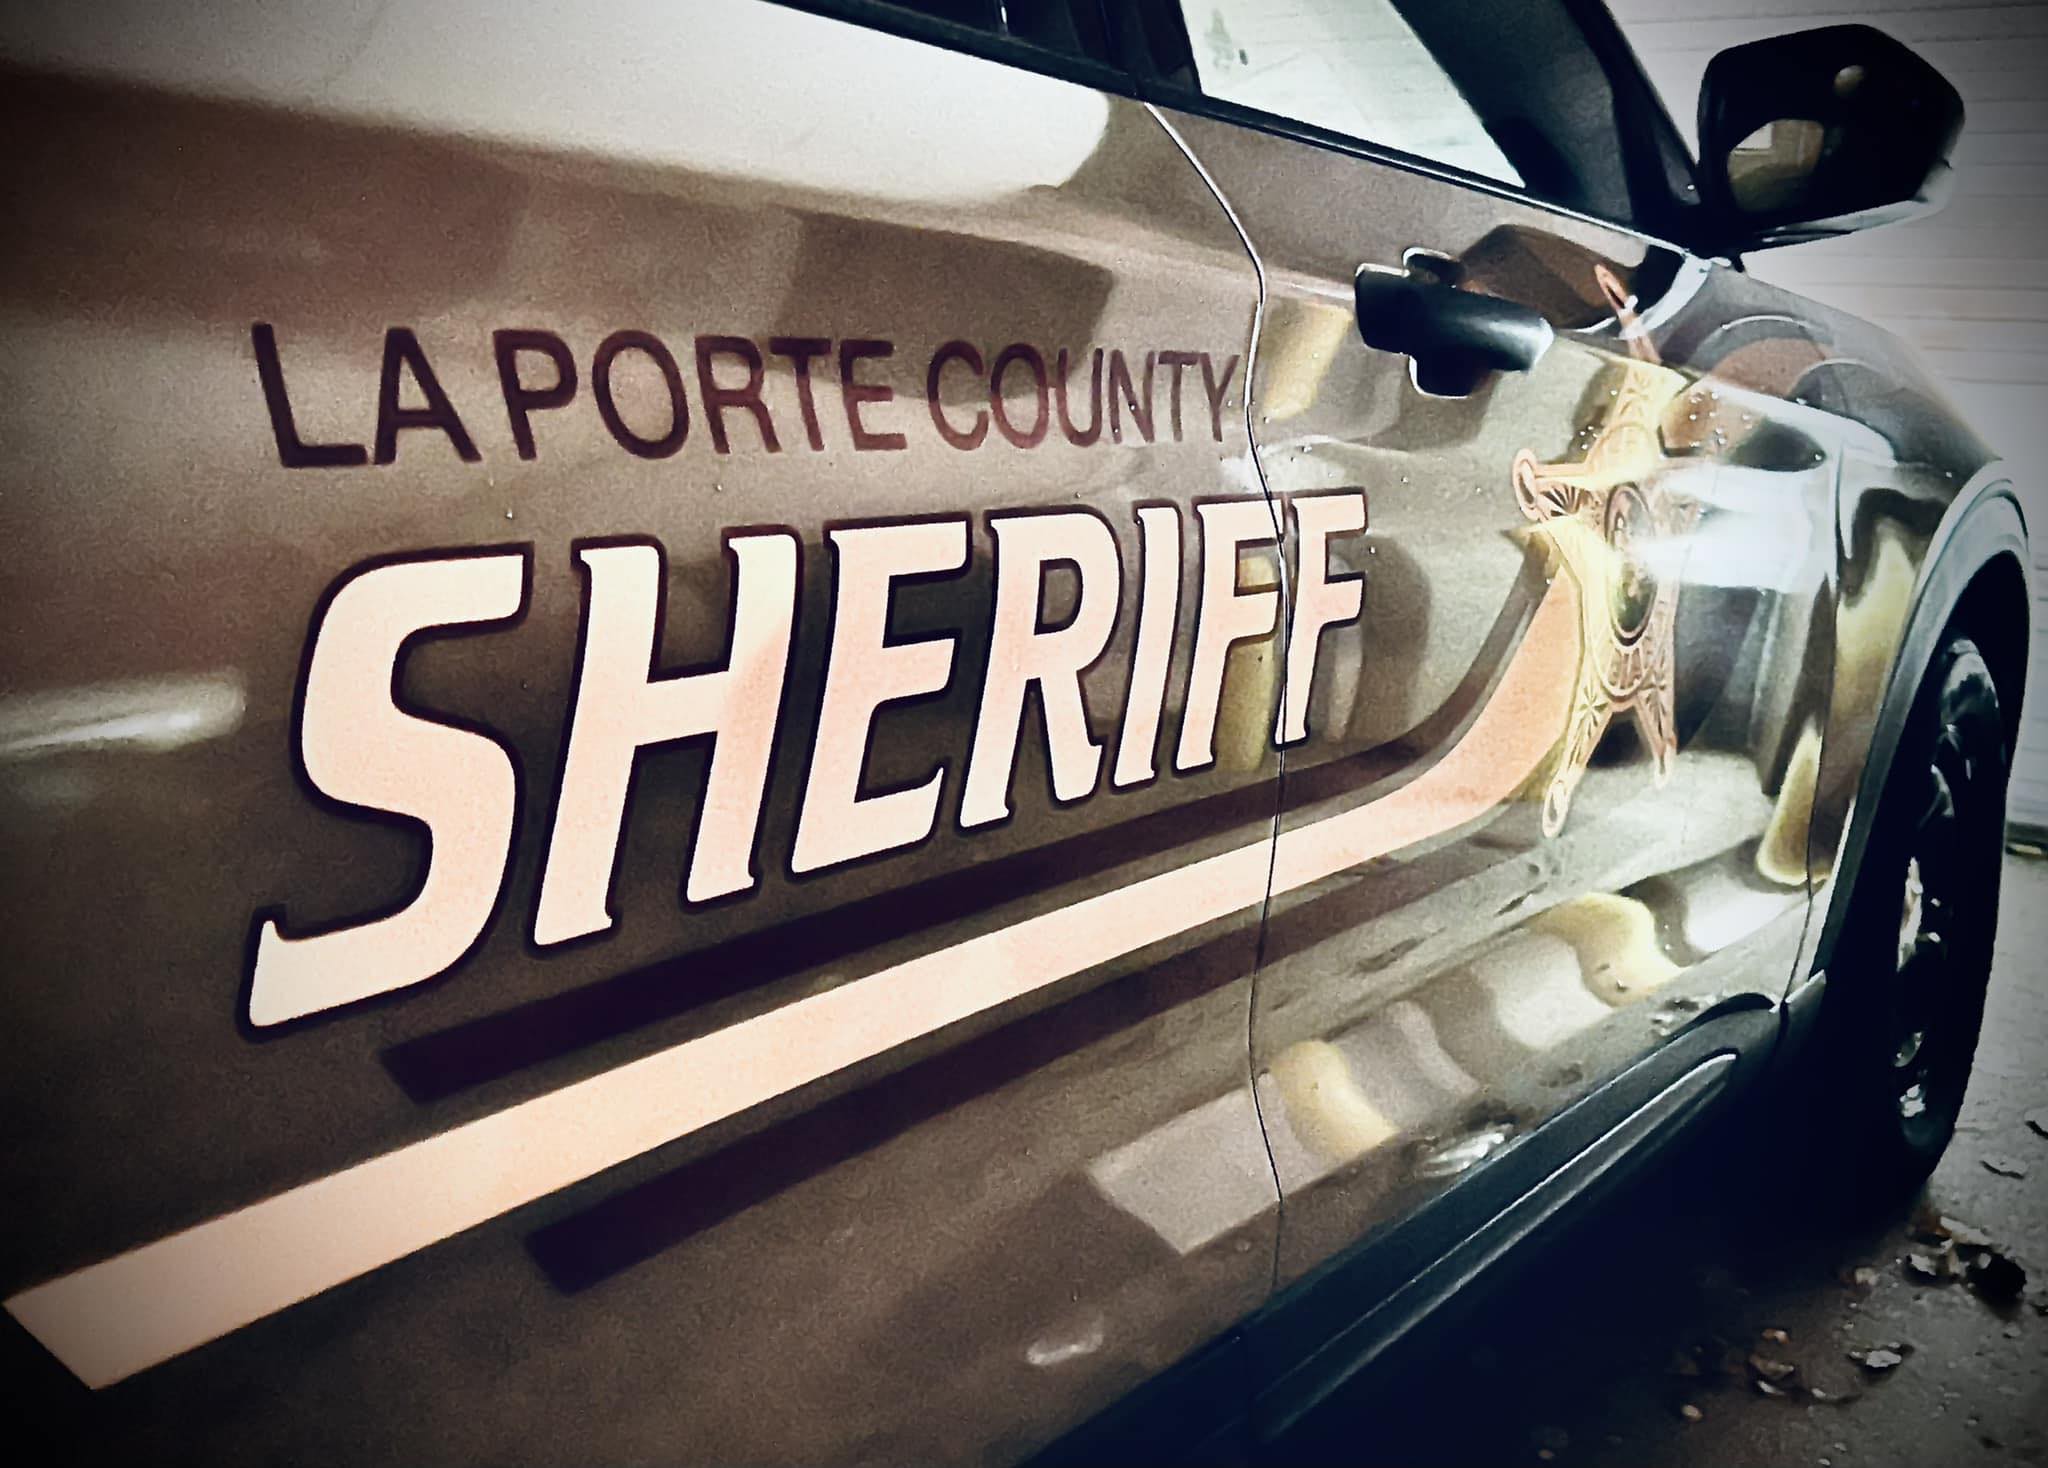 La Porte County Sheriff's Office warns of recent phone scams